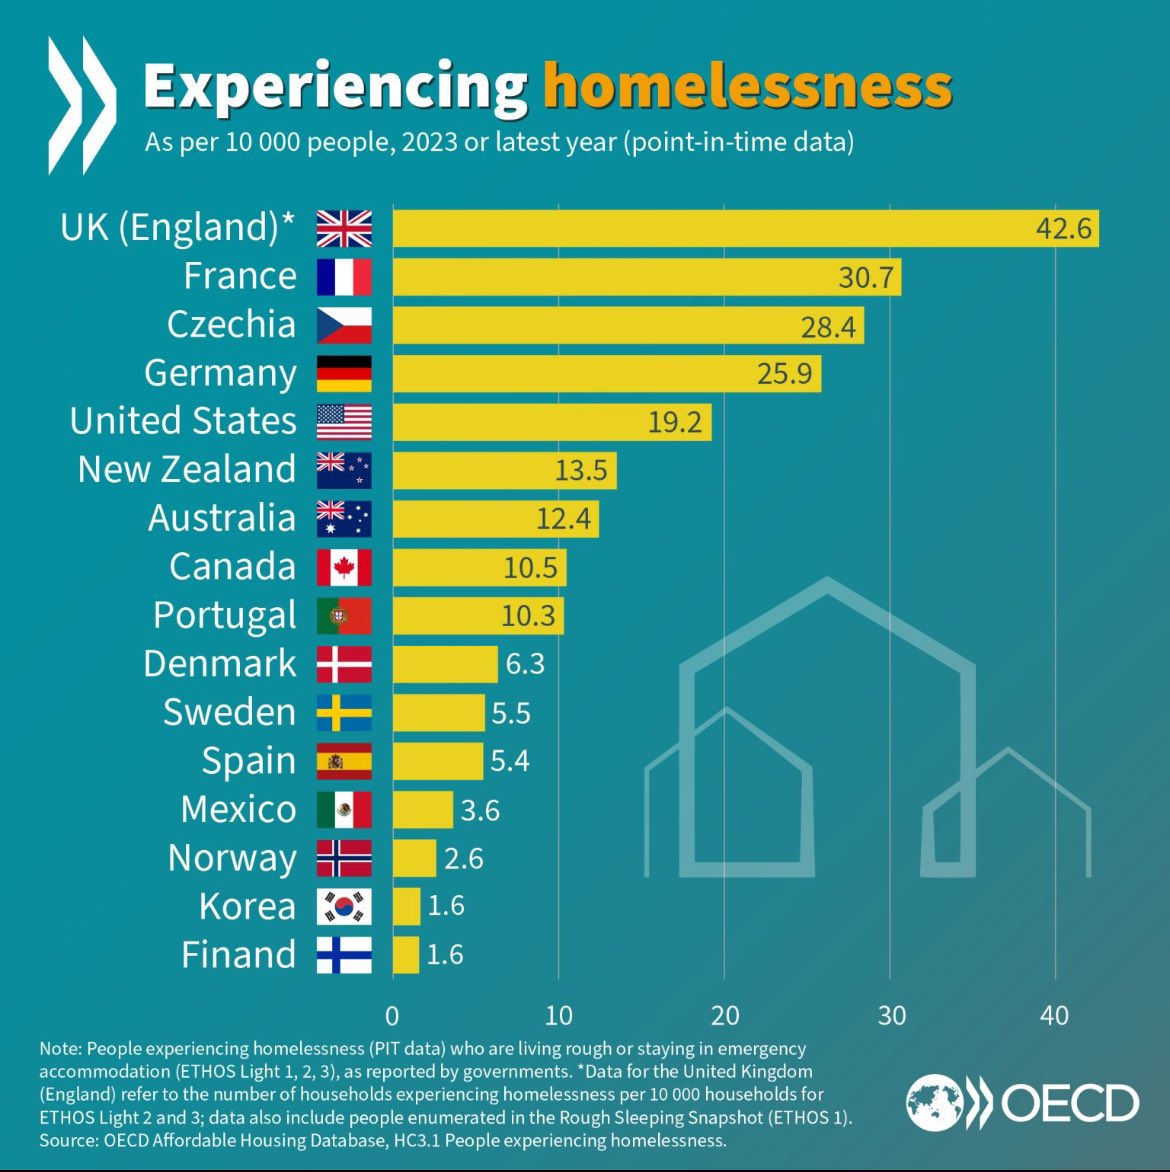 In this statistic, I am satisfied that we are at the bottom. Regardless, a lot of work needs to be done in Finland and globally. #endhomelessness